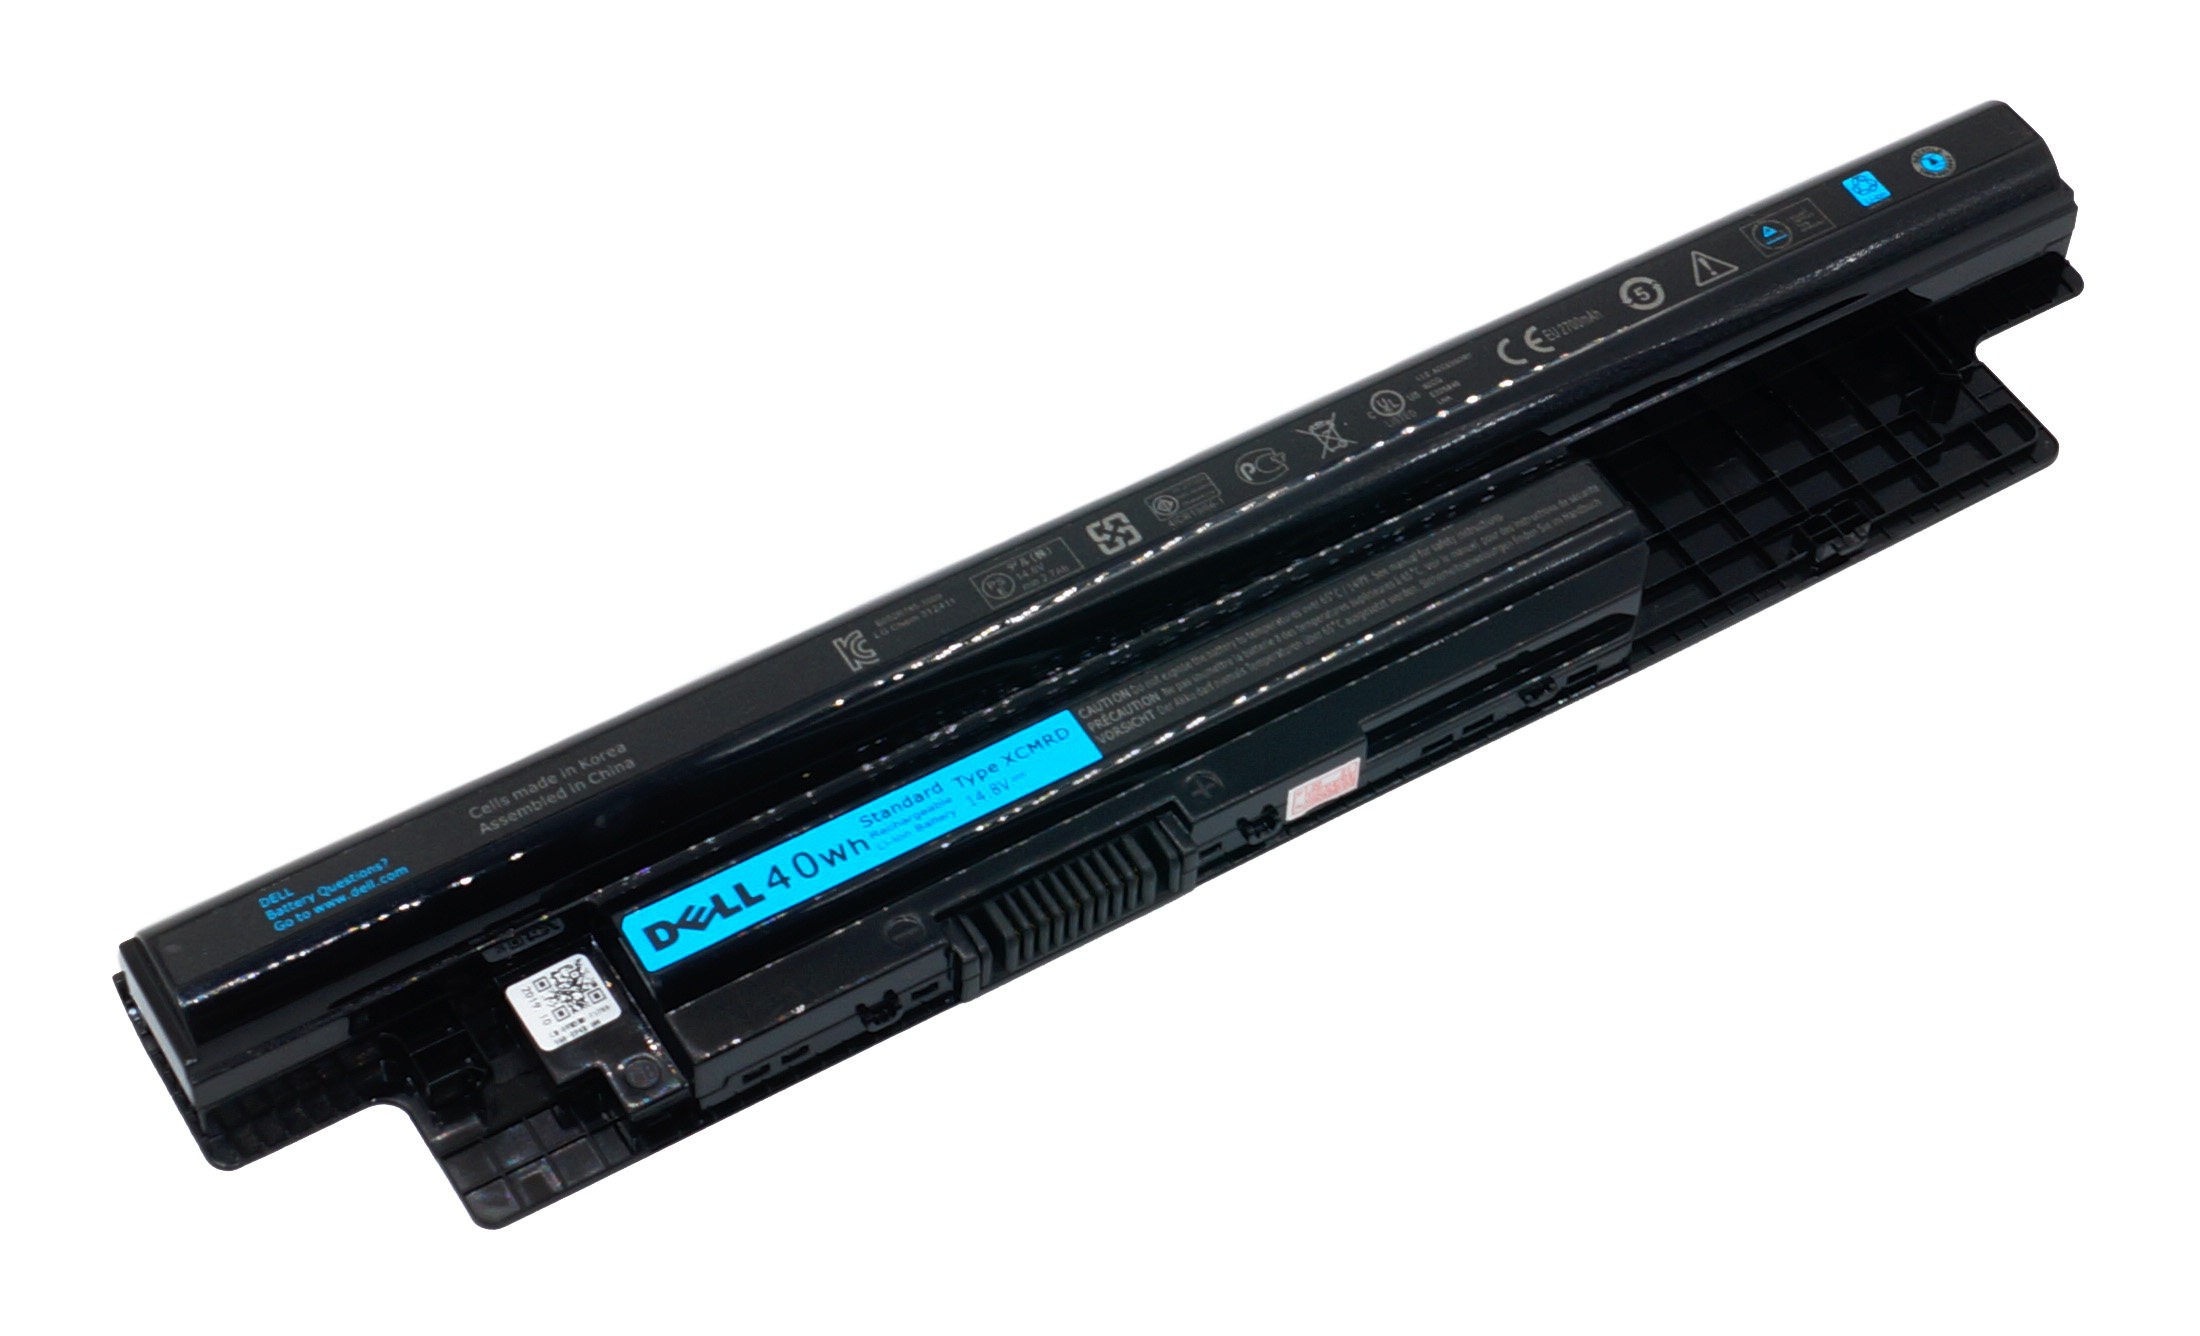   Dell (XCMRD) Inspiron 13521, 15-3521, 3537, 3721, 3542, 5748, 40Wh, 14.8V